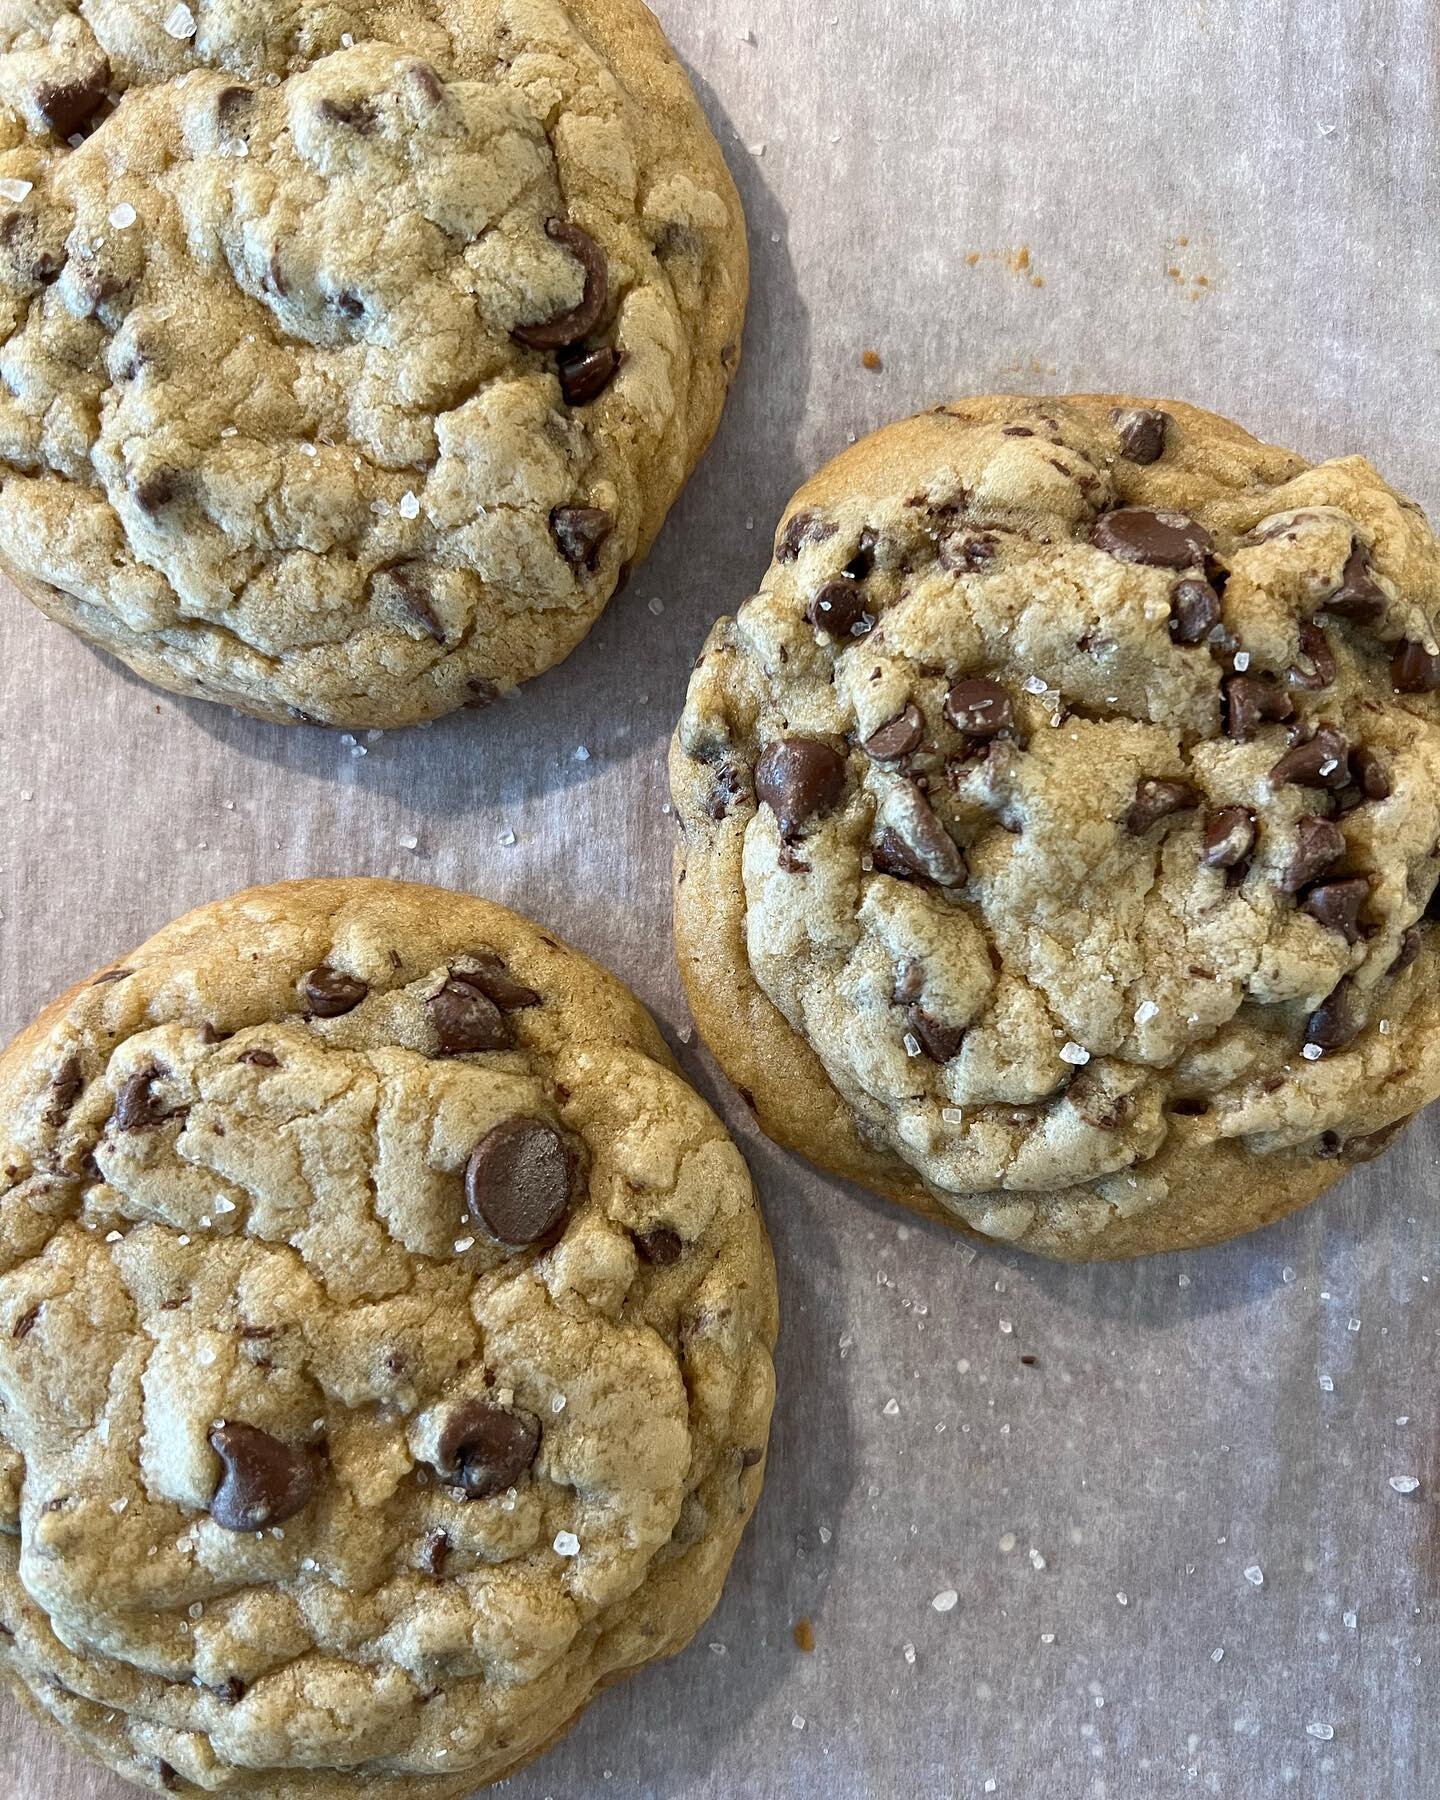 Nothing says &ldquo;Happy Friday Eve&rdquo; like some freshly baked salted chocolate chip cookies 😍🍪 Just a reminder that until the order page is up and running on my website, feel free to place orders with me through DM! 

#njcookies #njbaking #nj